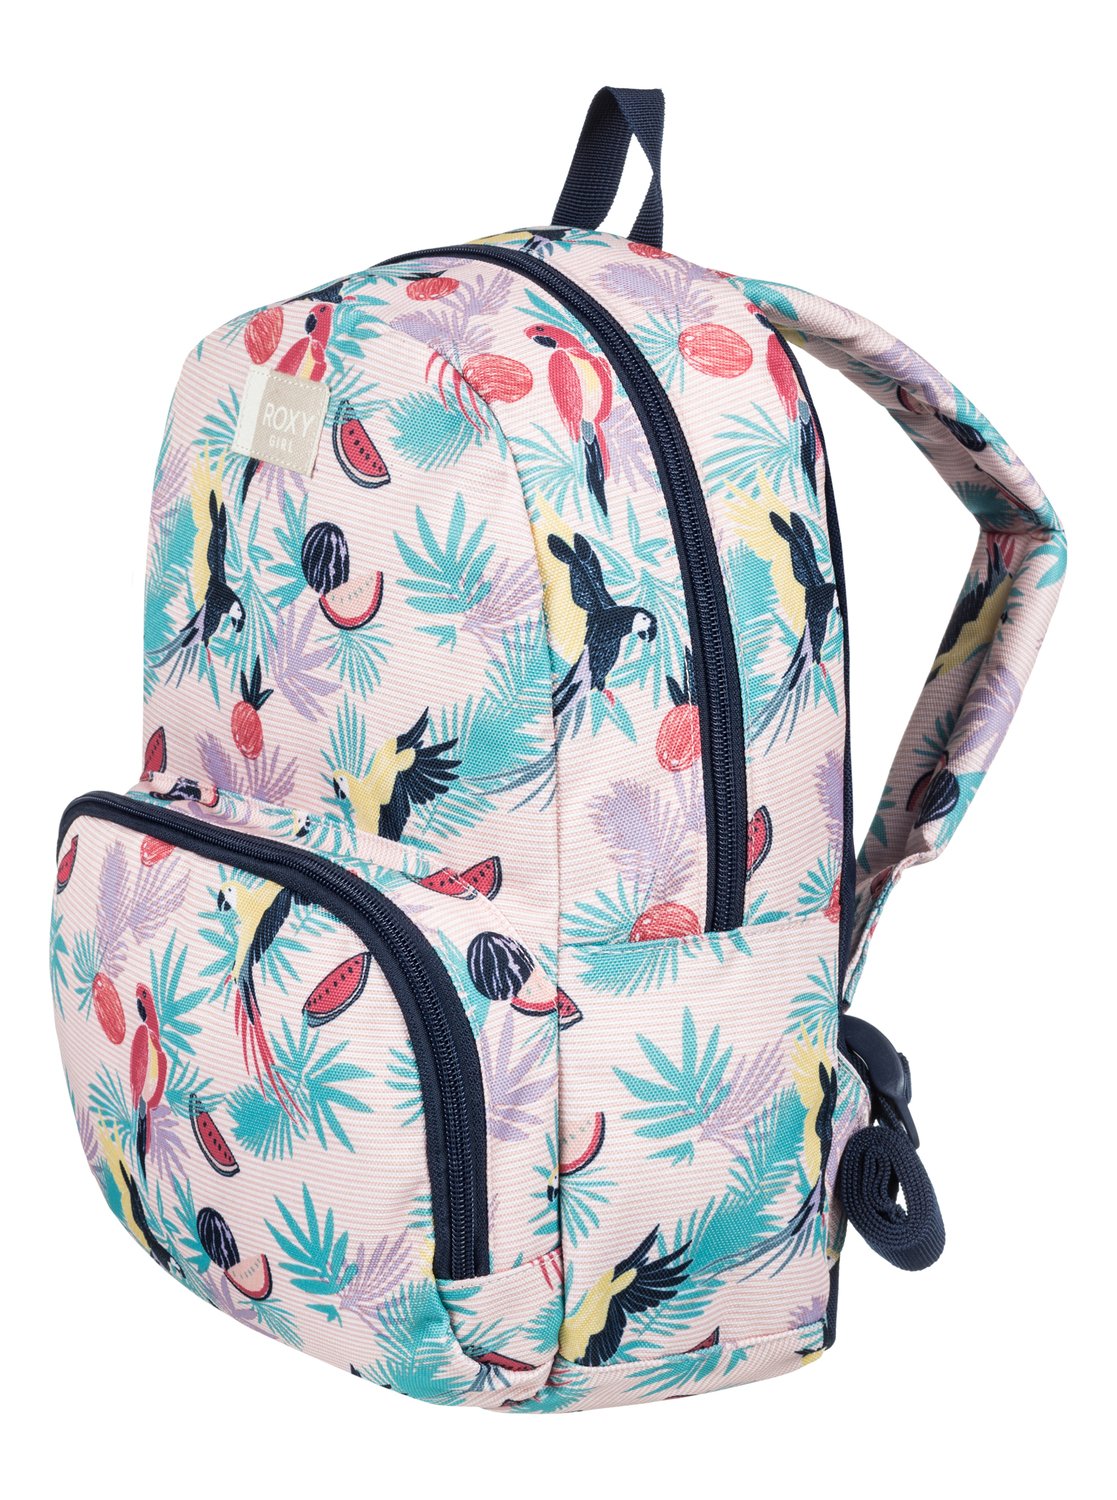 All The Colors - Extra Small Backpack 3613373351180 | Roxy